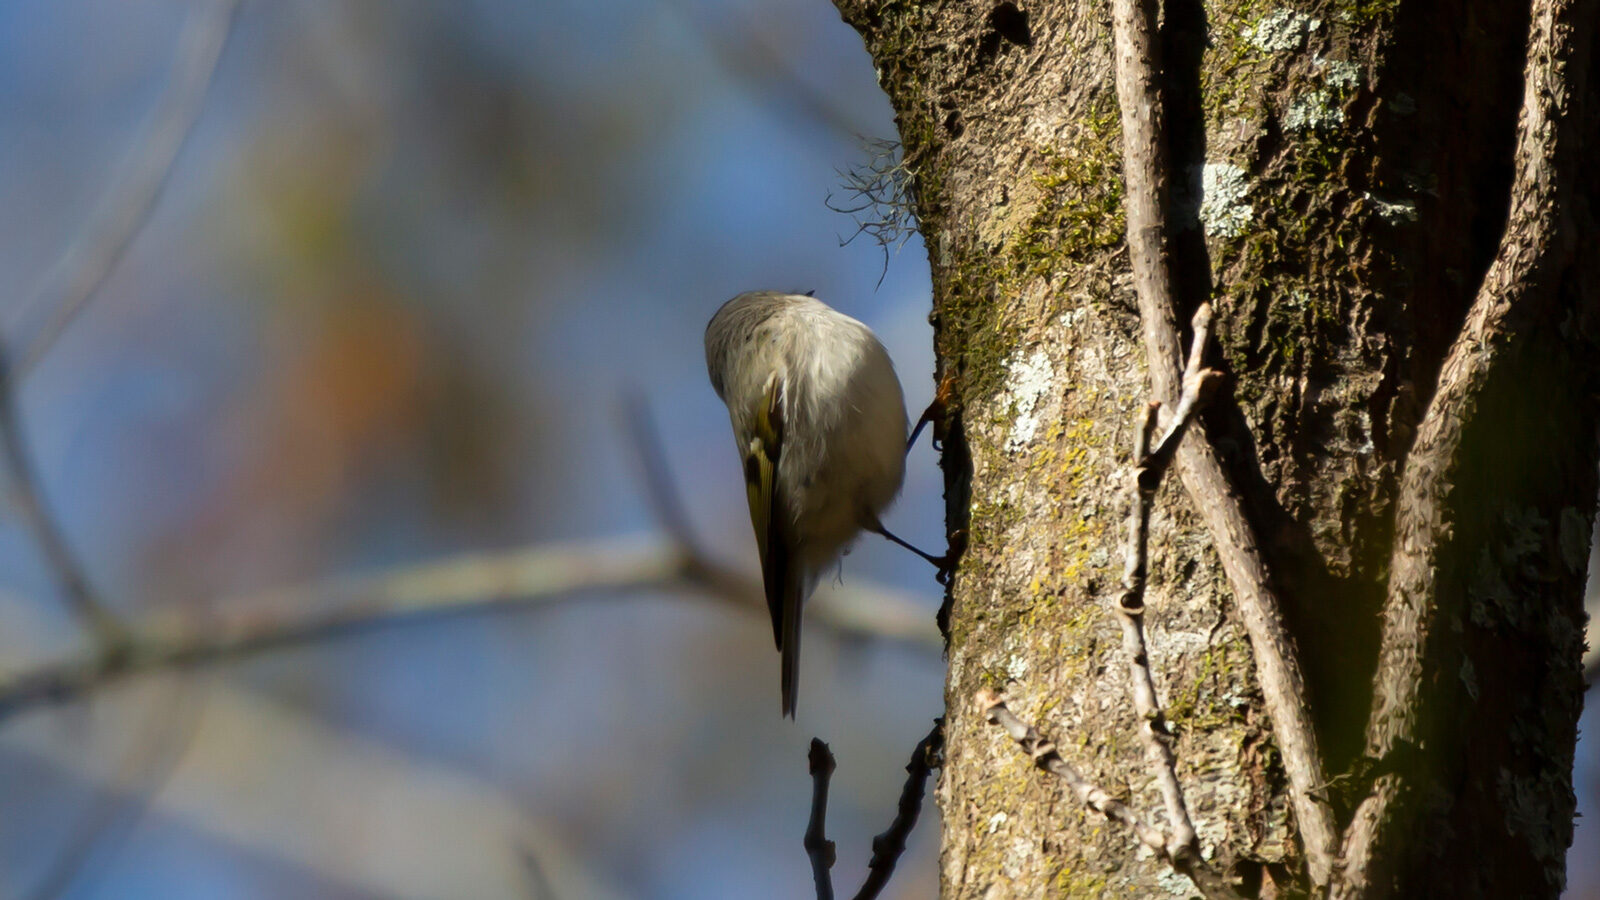 Golden-crowned kinglet foraging on a tree trunk